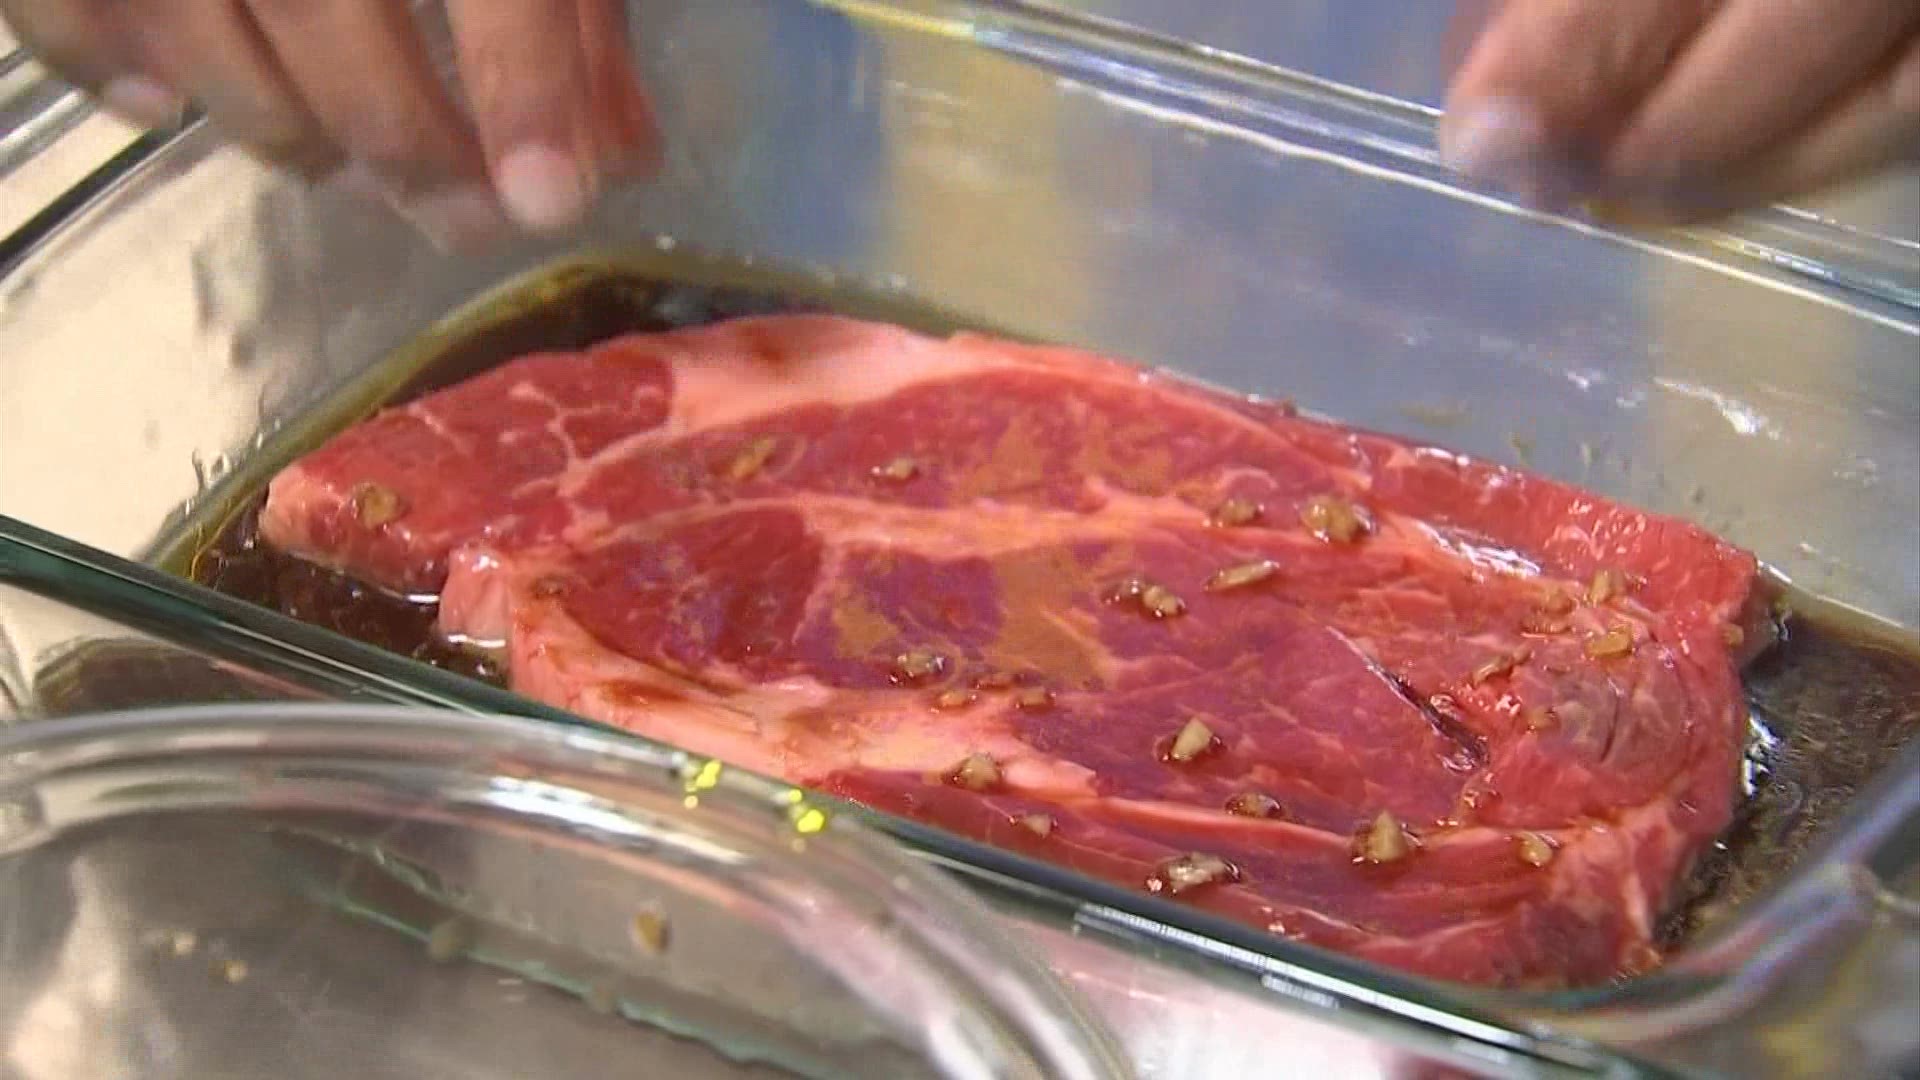 As the Fourth of July weekend approaches, doctors share hacks to keep the food on the barbecue safe for your family and friends.